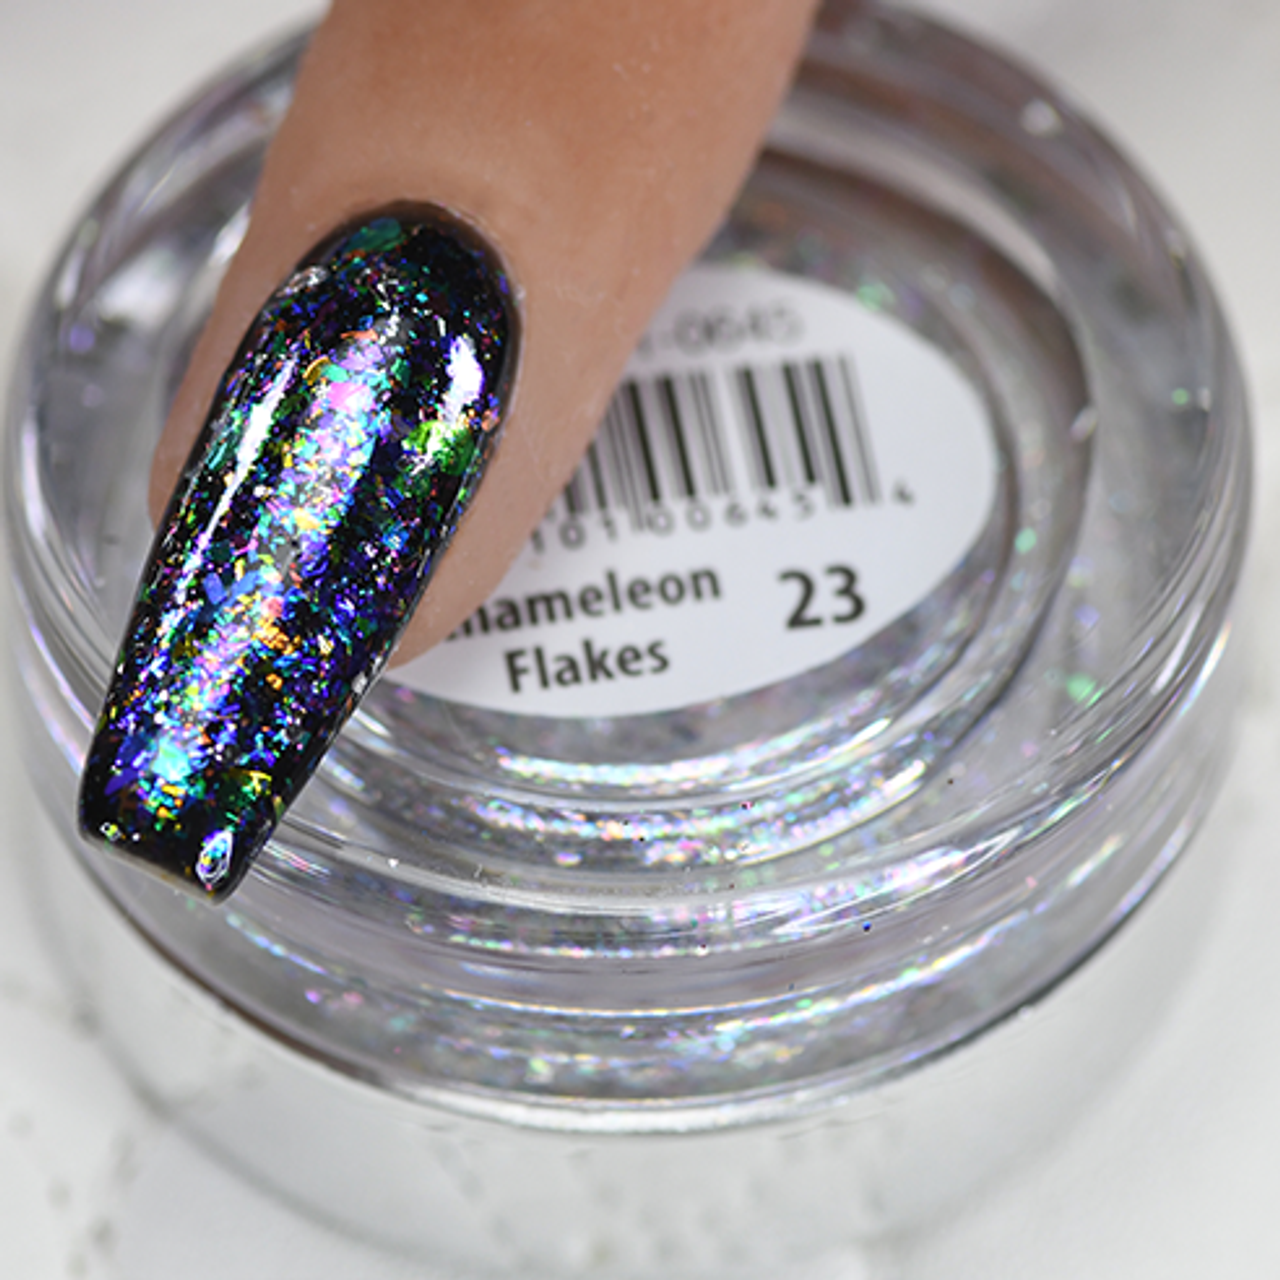 Cre8tion Nail Art Effect- Chameleon Flakes #23